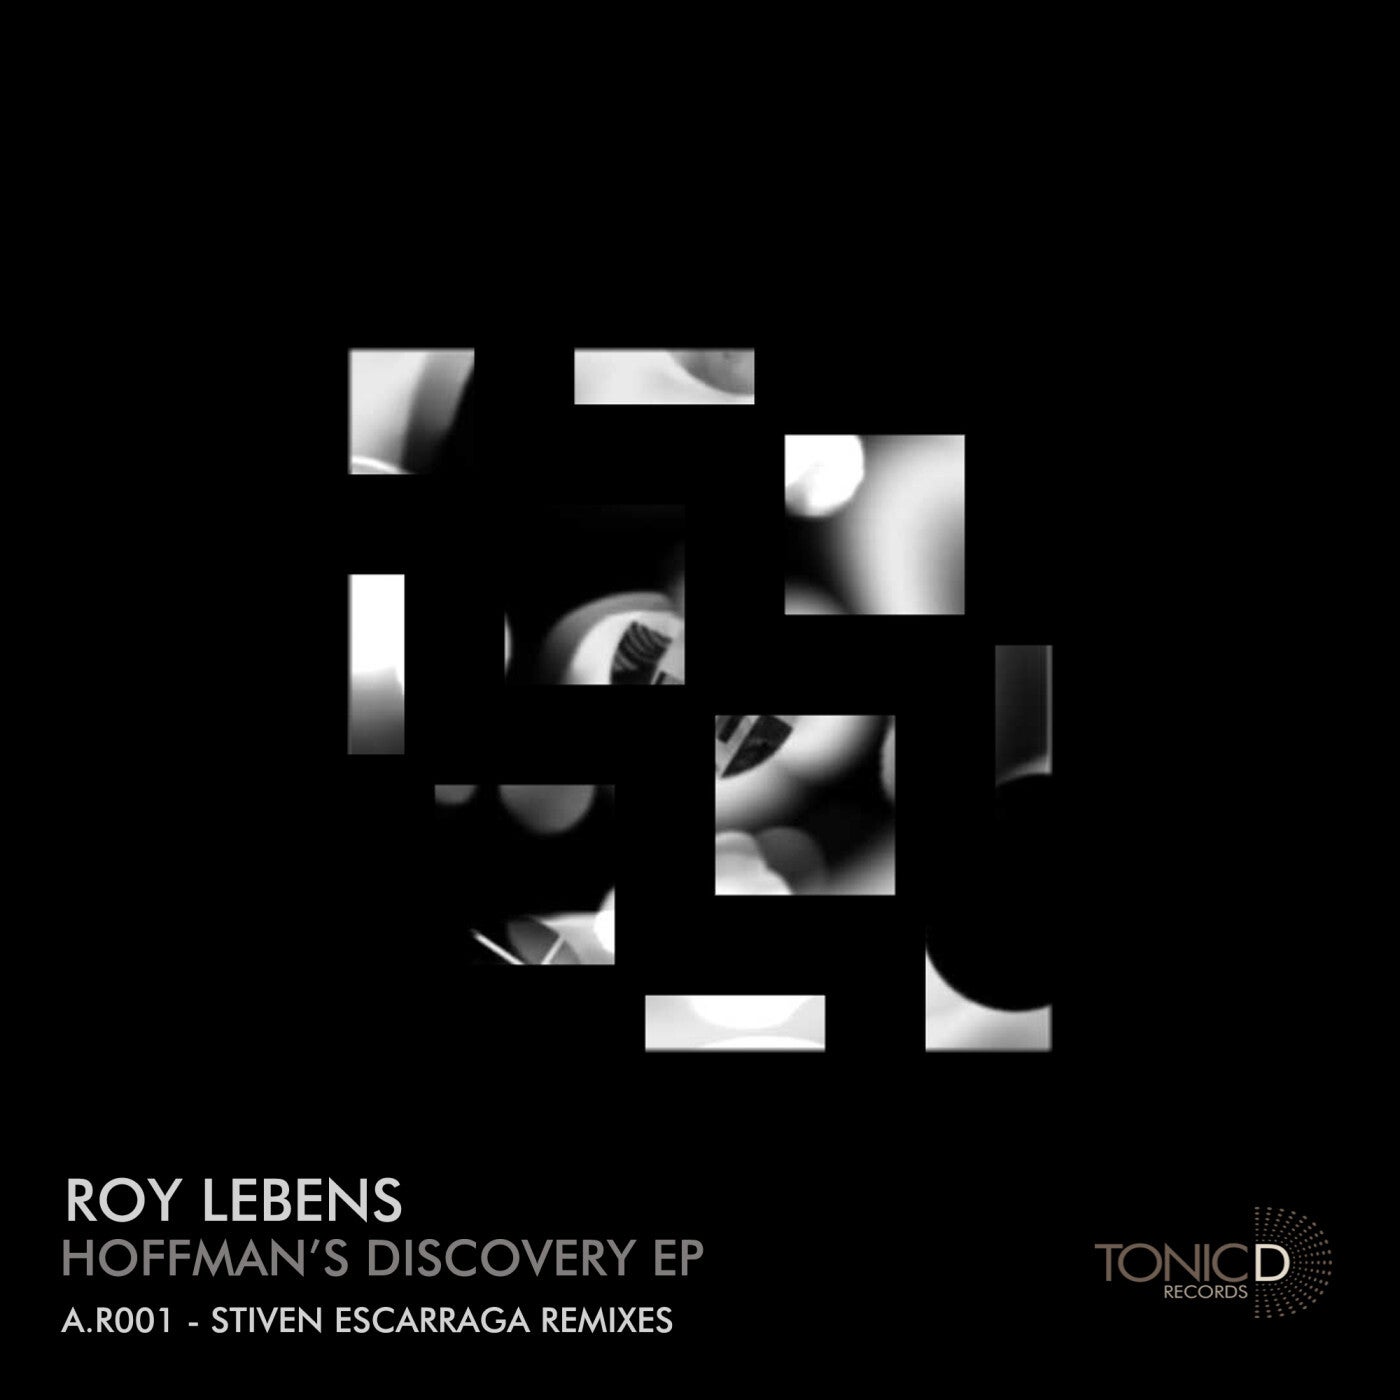 Hoffman's Discovery EP